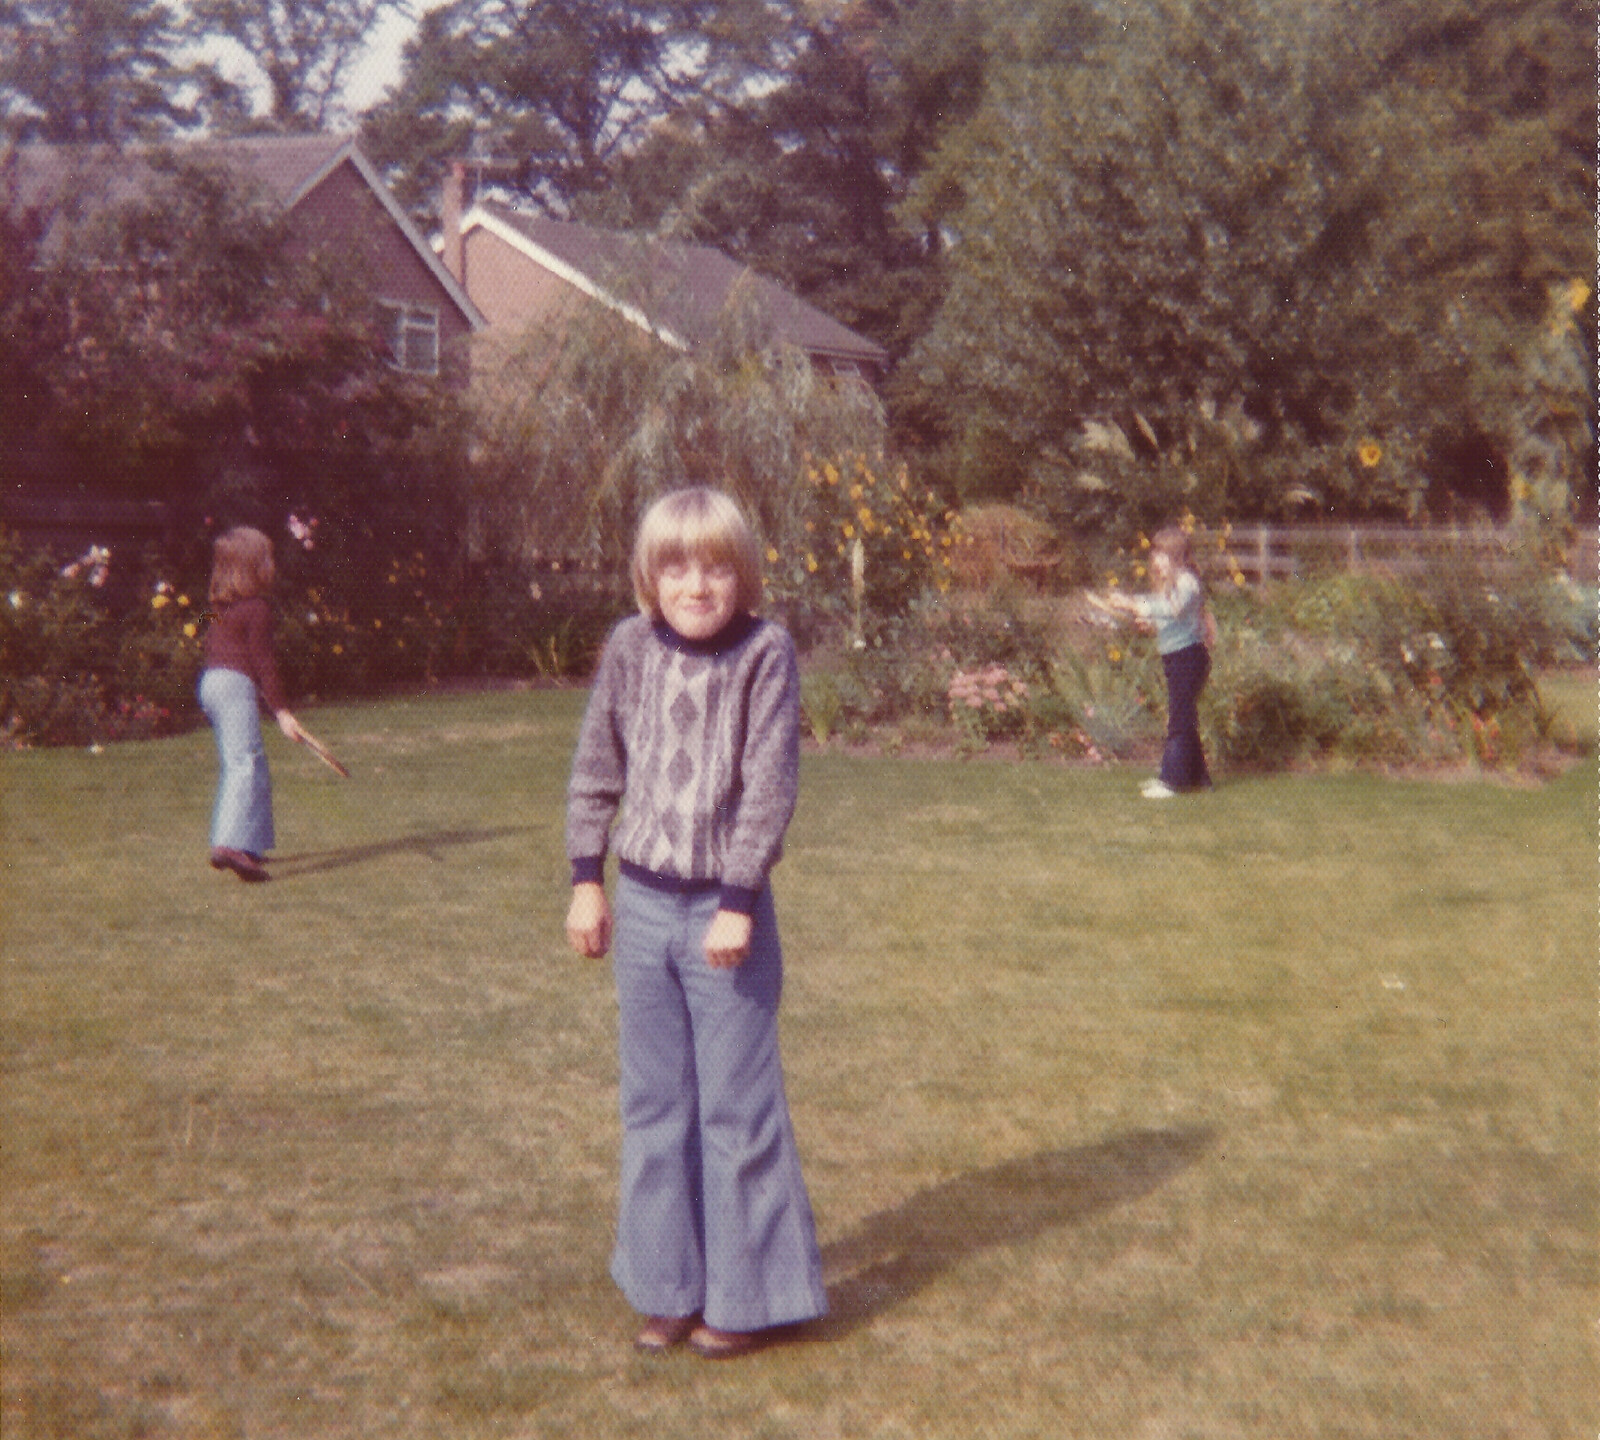 Family History: Birtle's Close, Sandbach, Cheshire - 24th January 2020: Nosher in some classic 70s Dingers at Birtle's Close